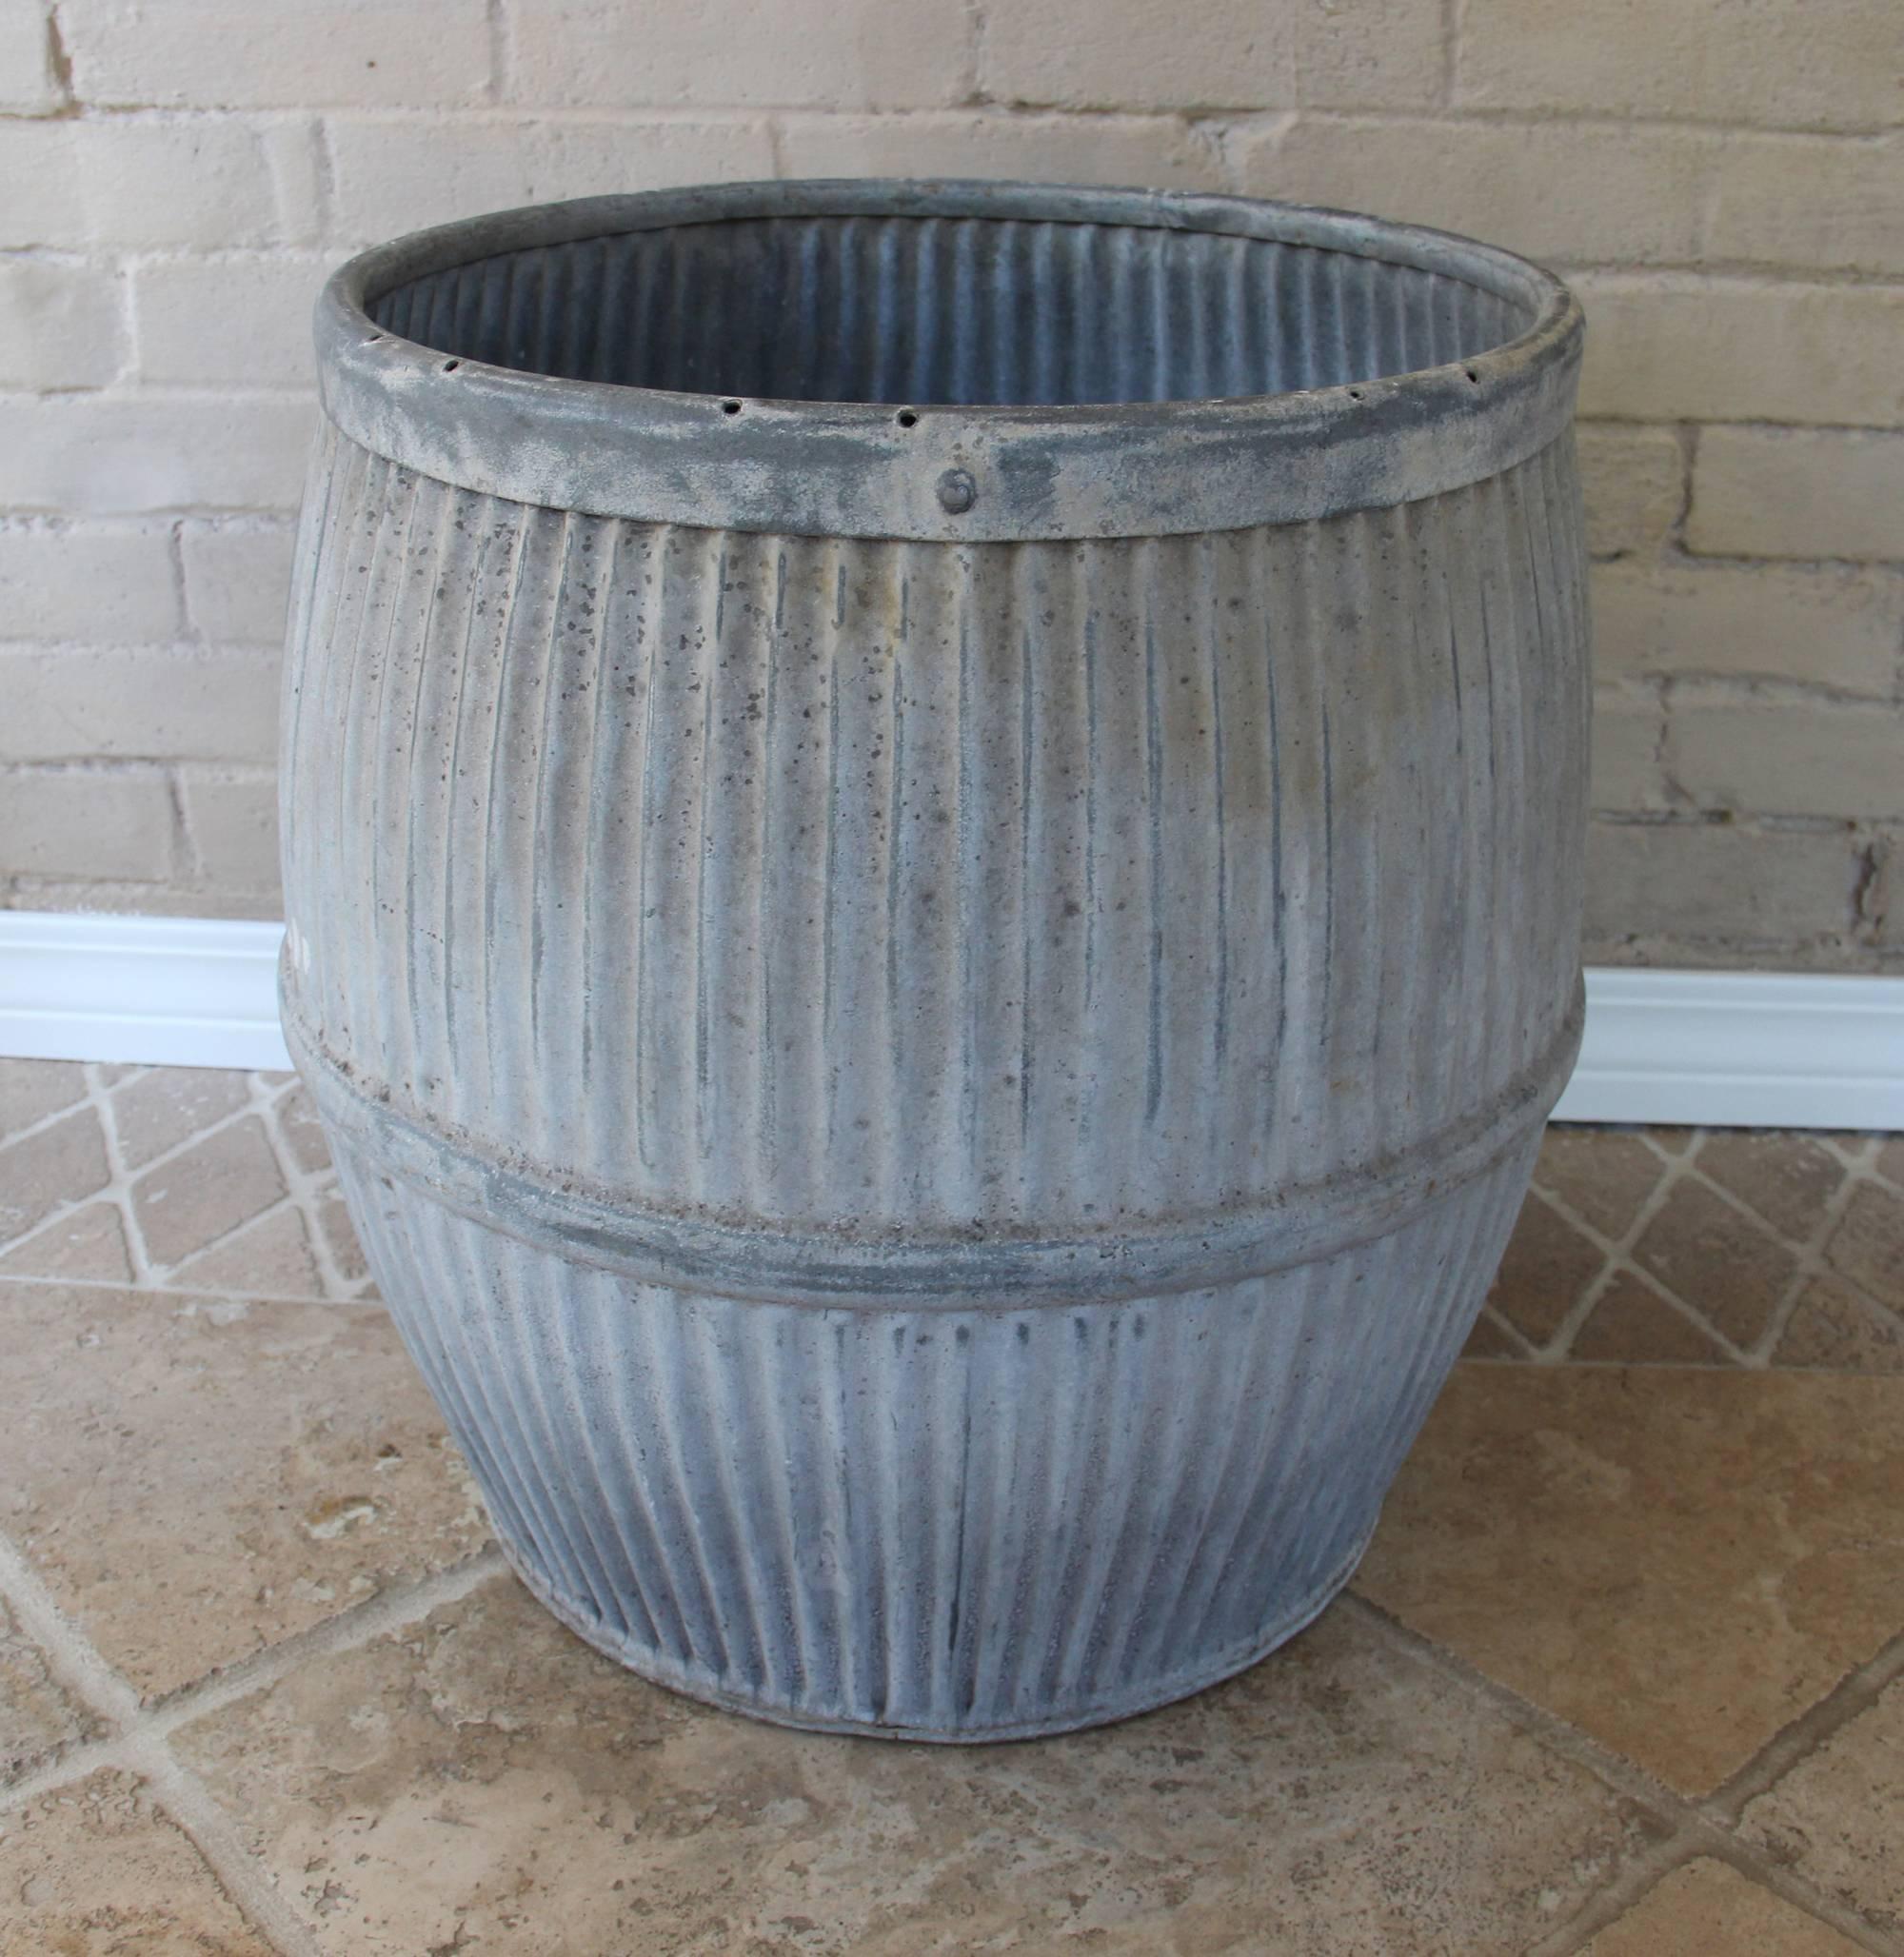 This vintage English Industrial dolly tub is made of galvanized zinc and was originally used for washing clothes. Dolly tubs make wonderful pots for plants. They are perfect for the home or garden.